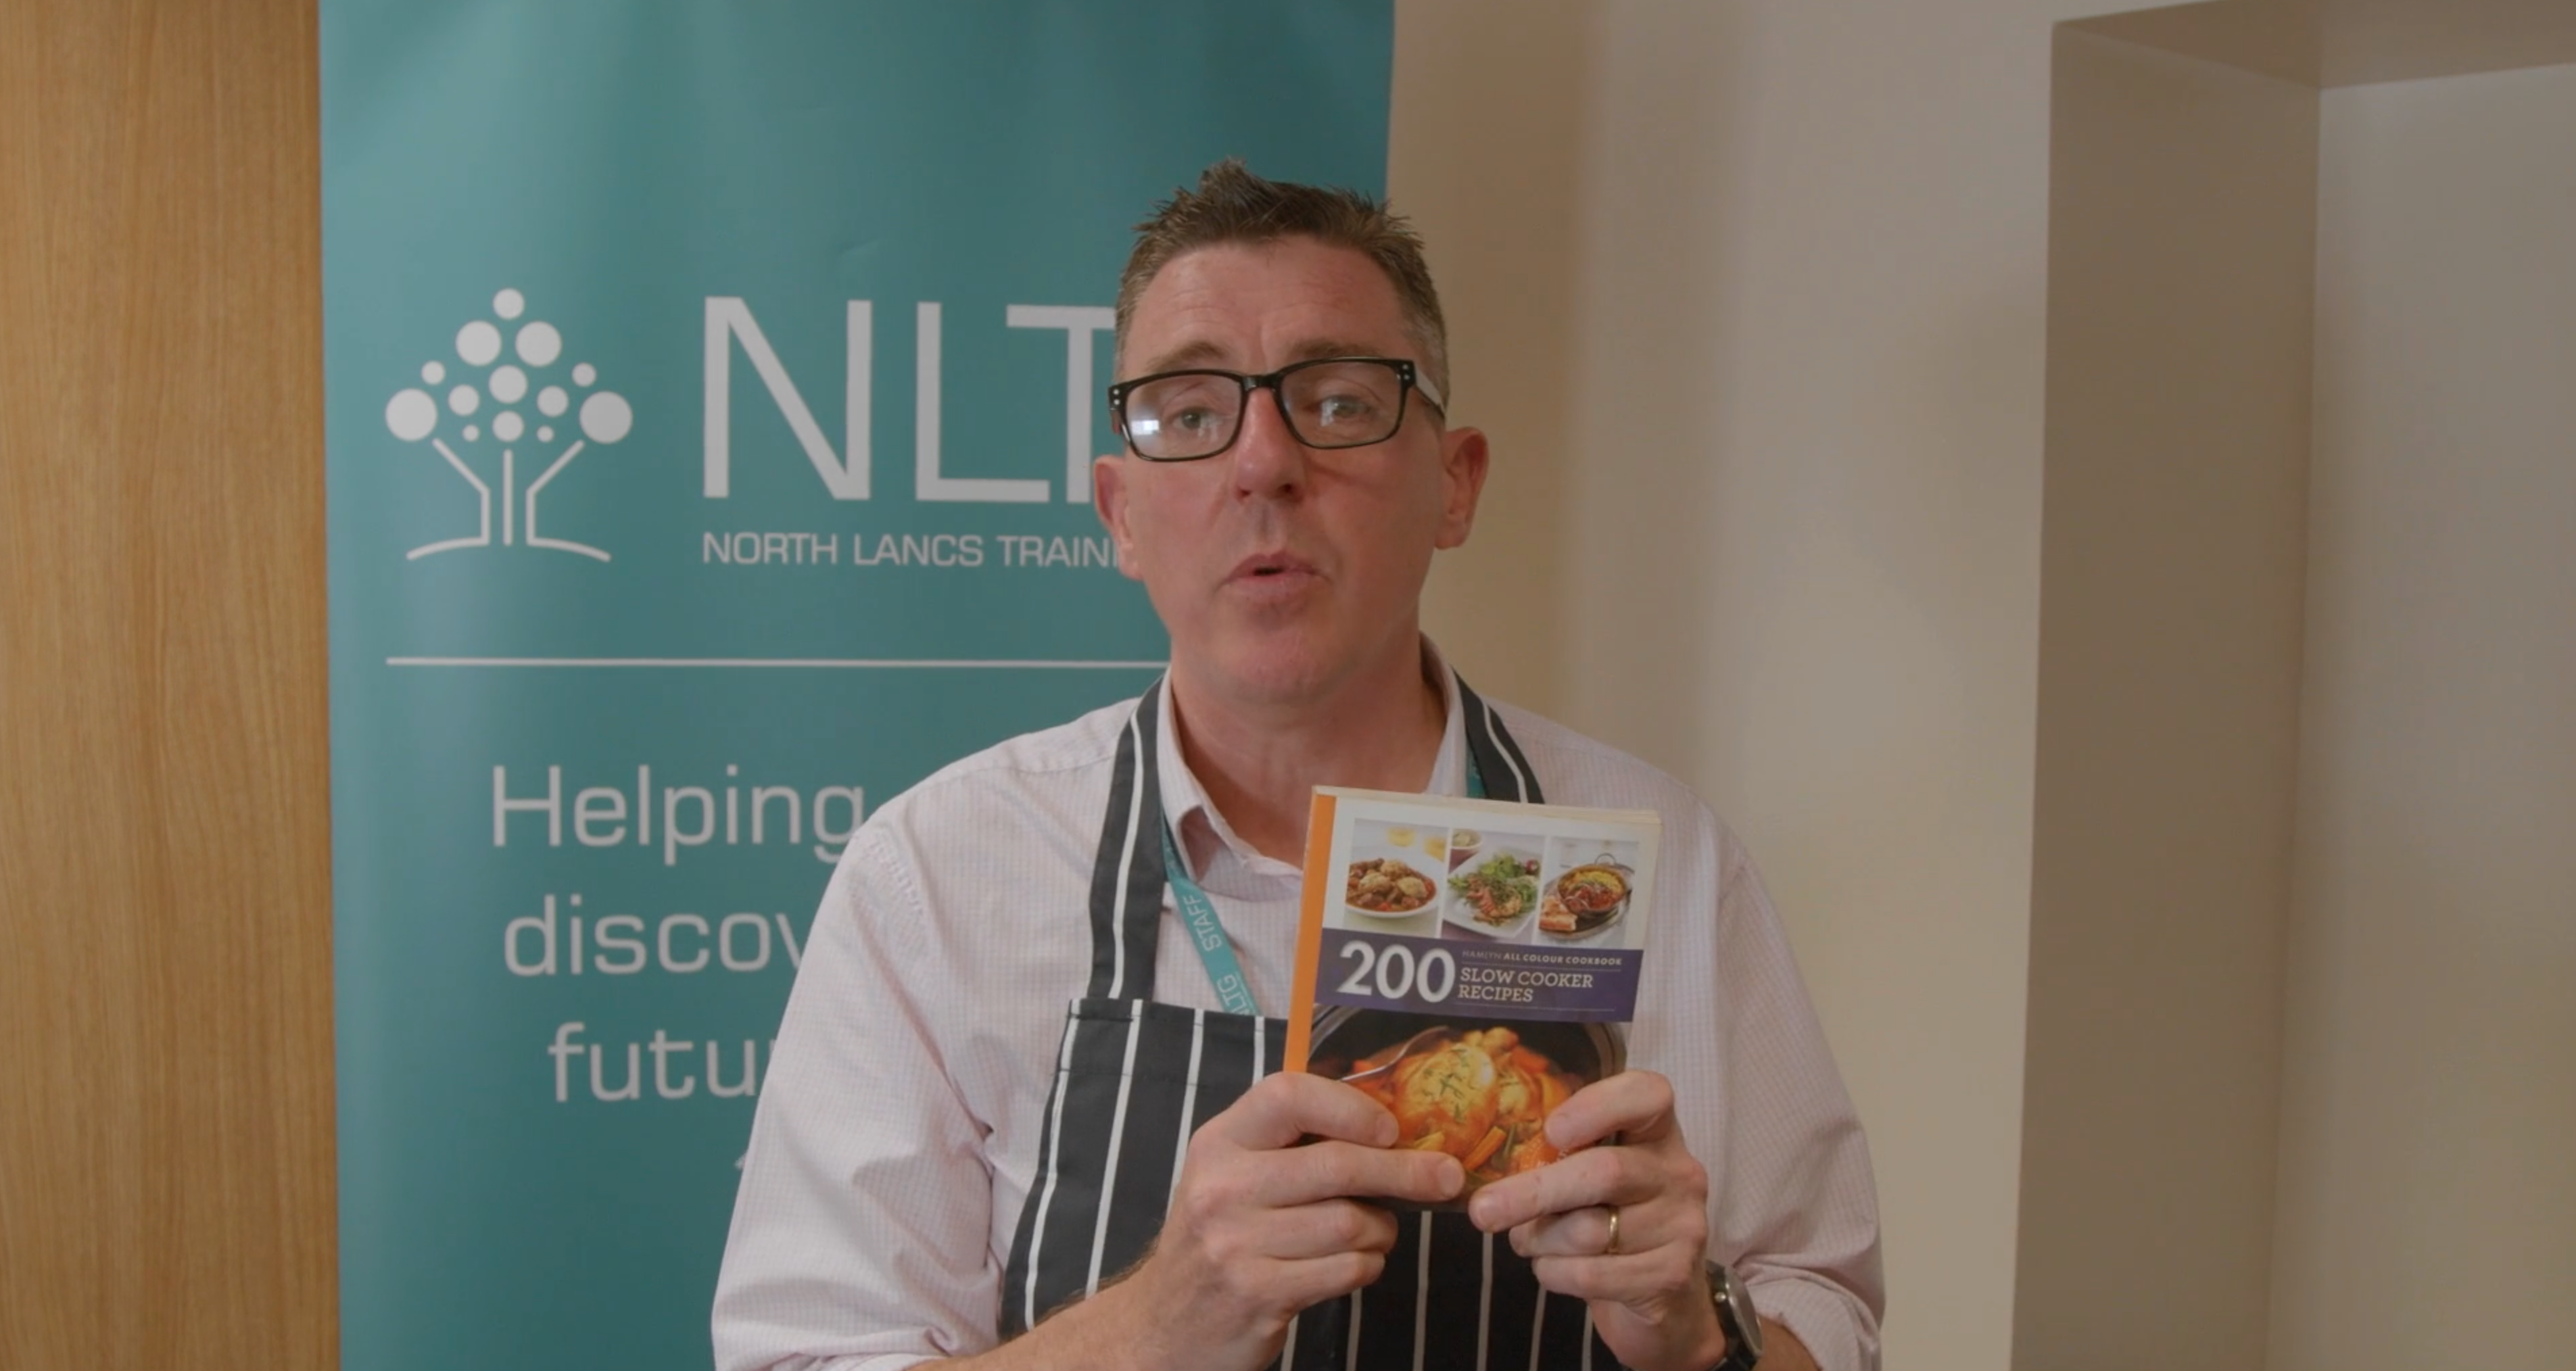 NLTG TEAM UP WITH THE FOOD PANTRY TO OFFER FREE SLOW COOKER LESSONS